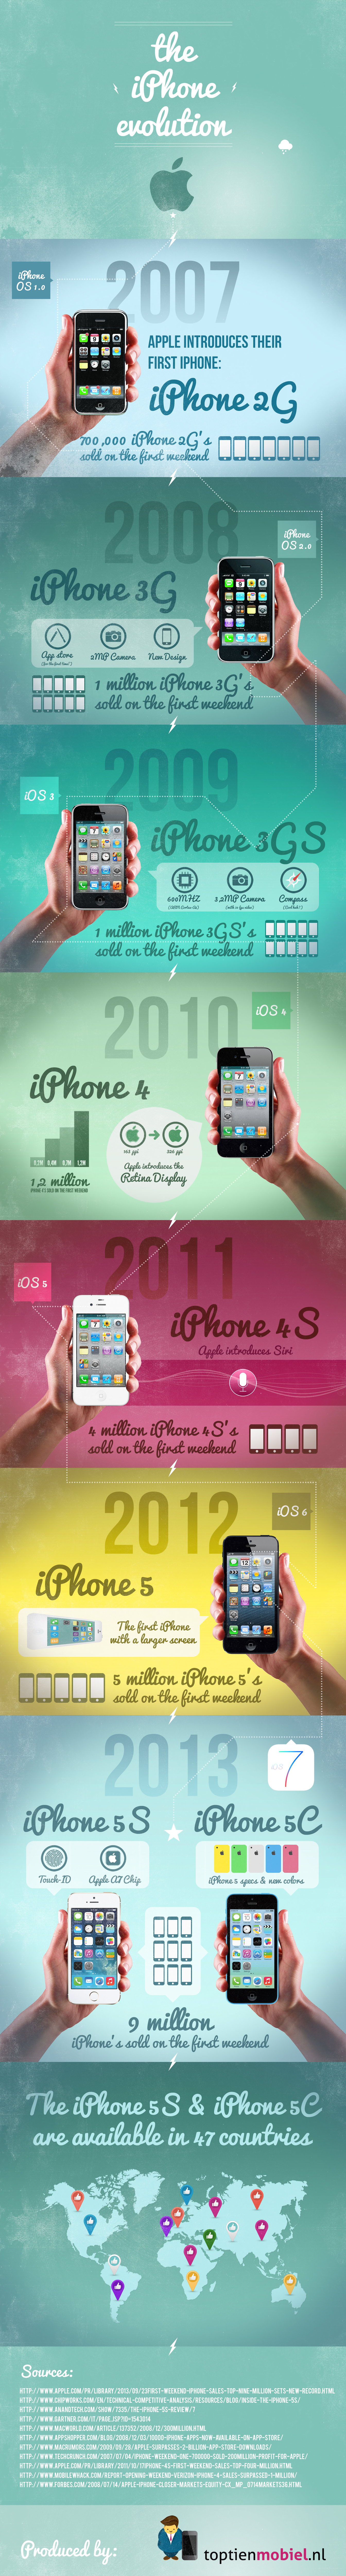 The Evolution of the iPhone [Infographic]